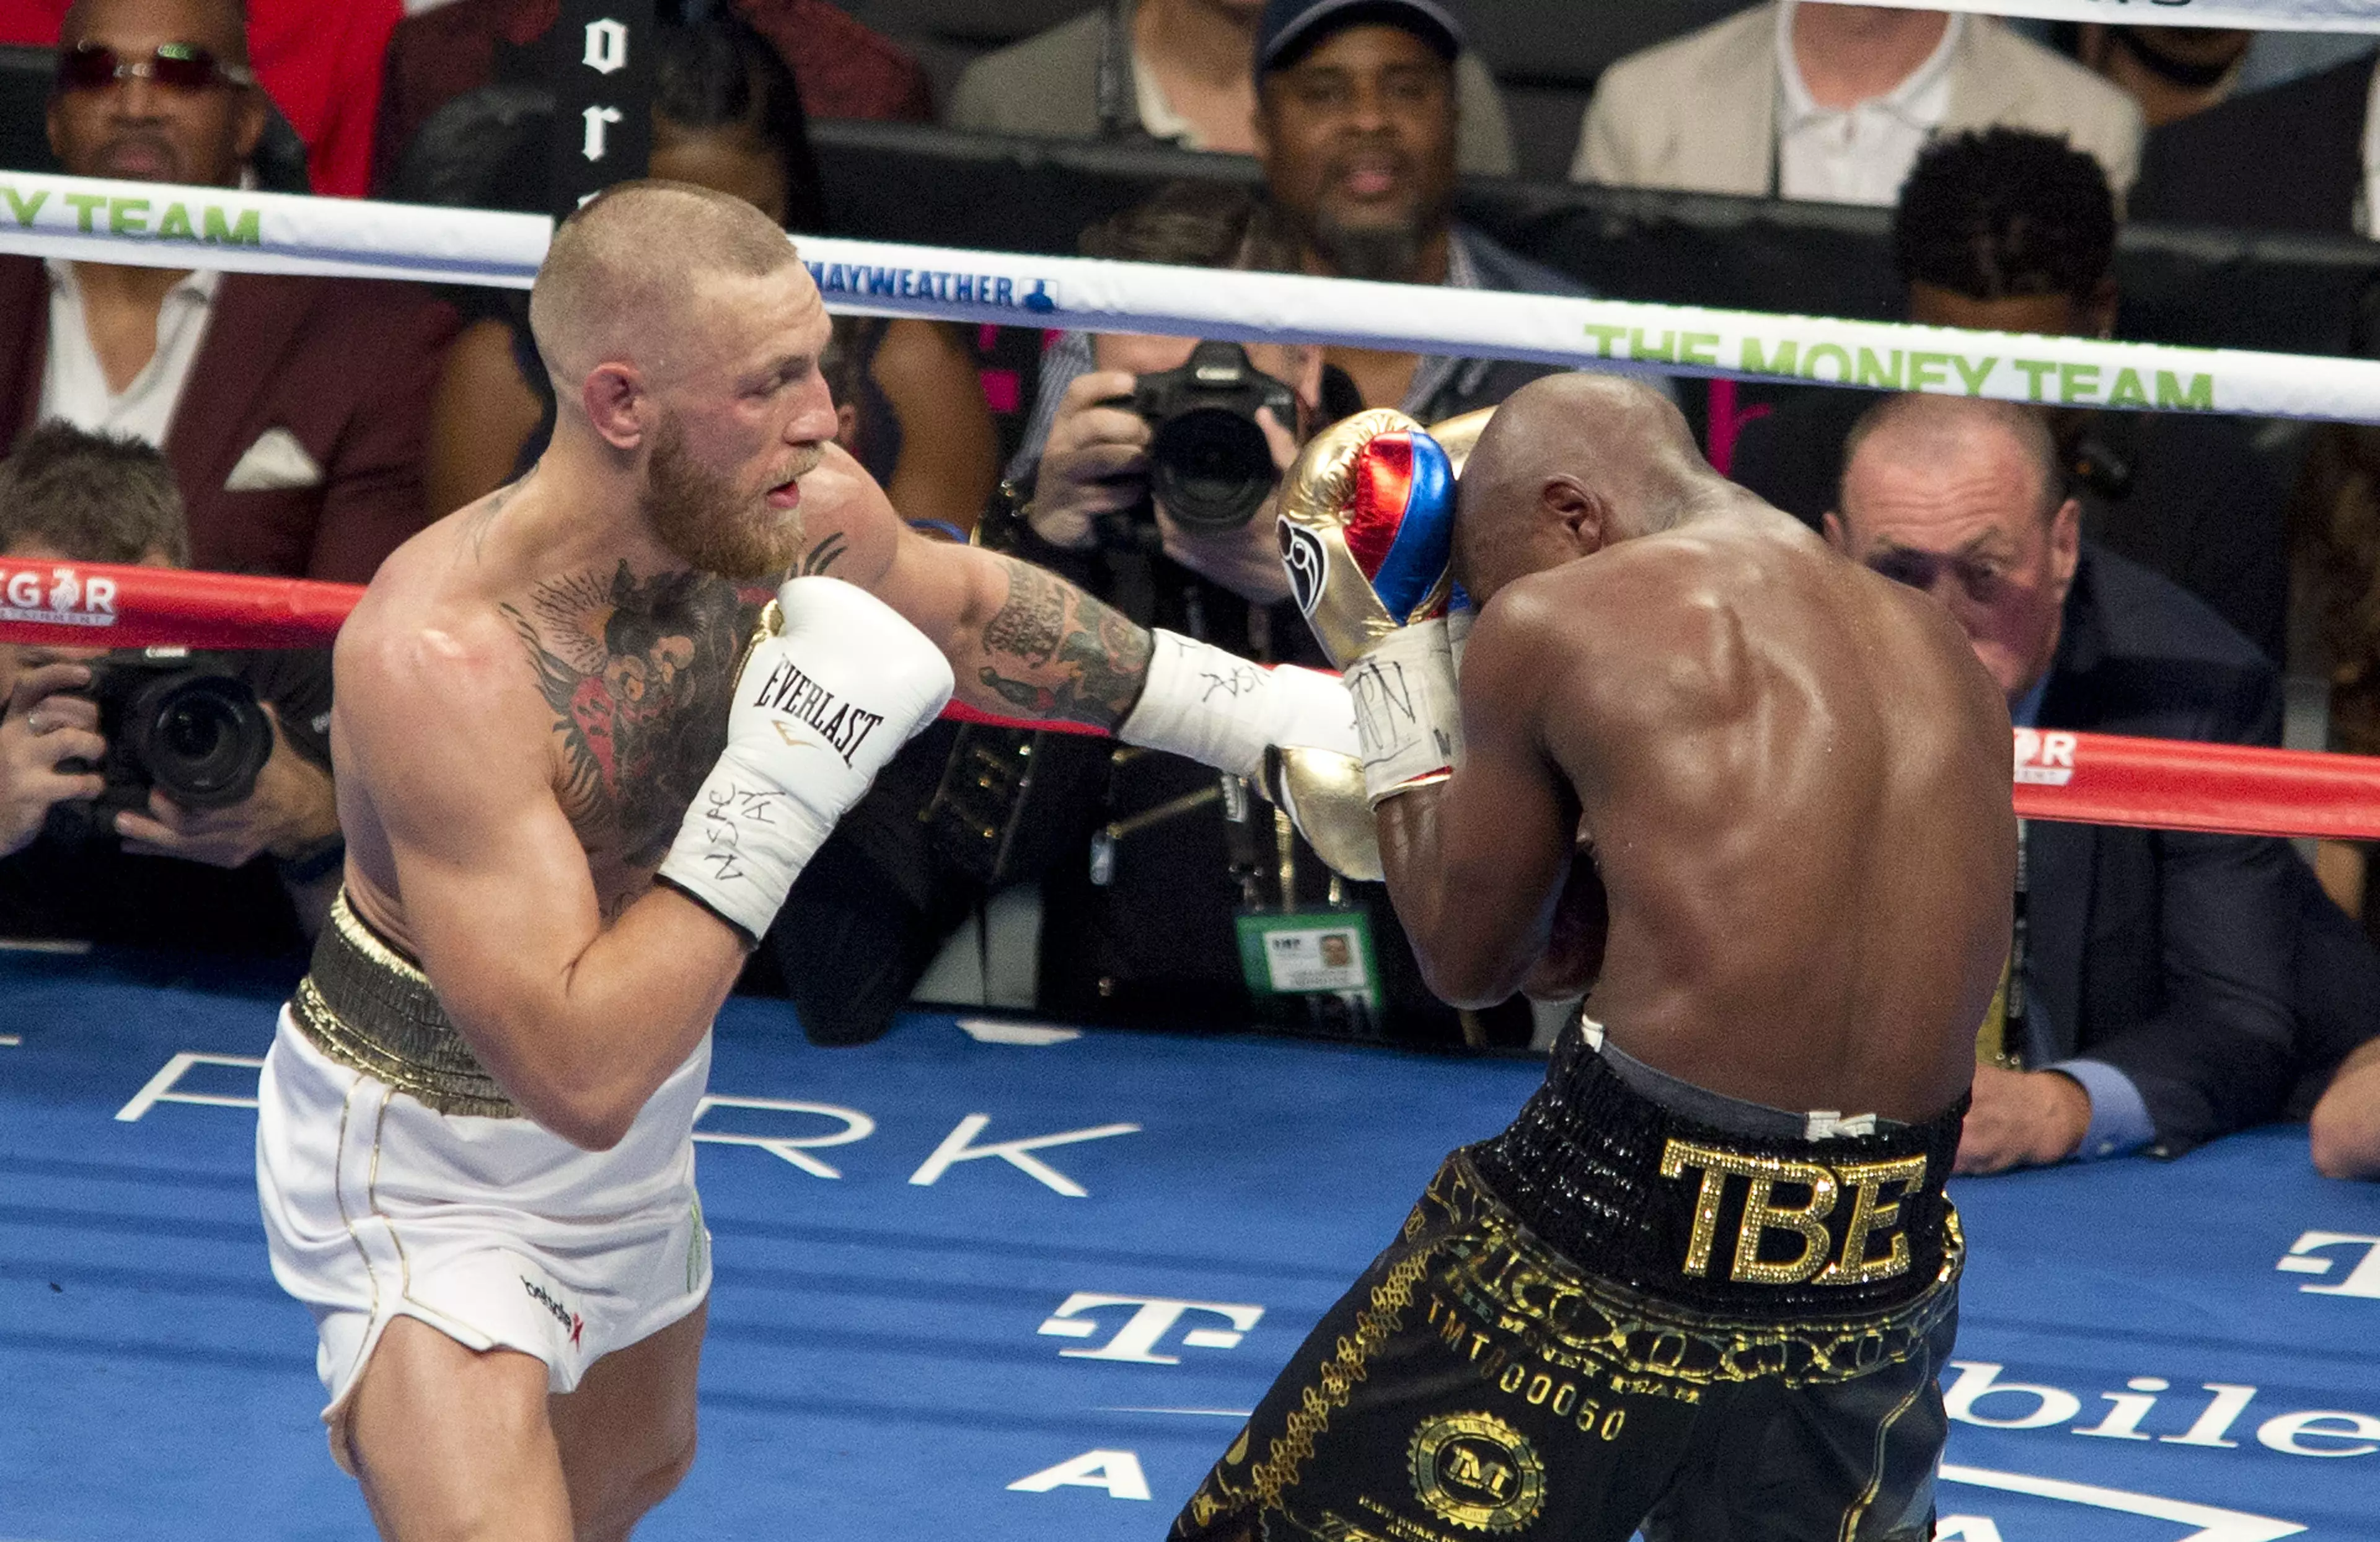 McGregor vs Mayweather was one of the richest bouts of all time.